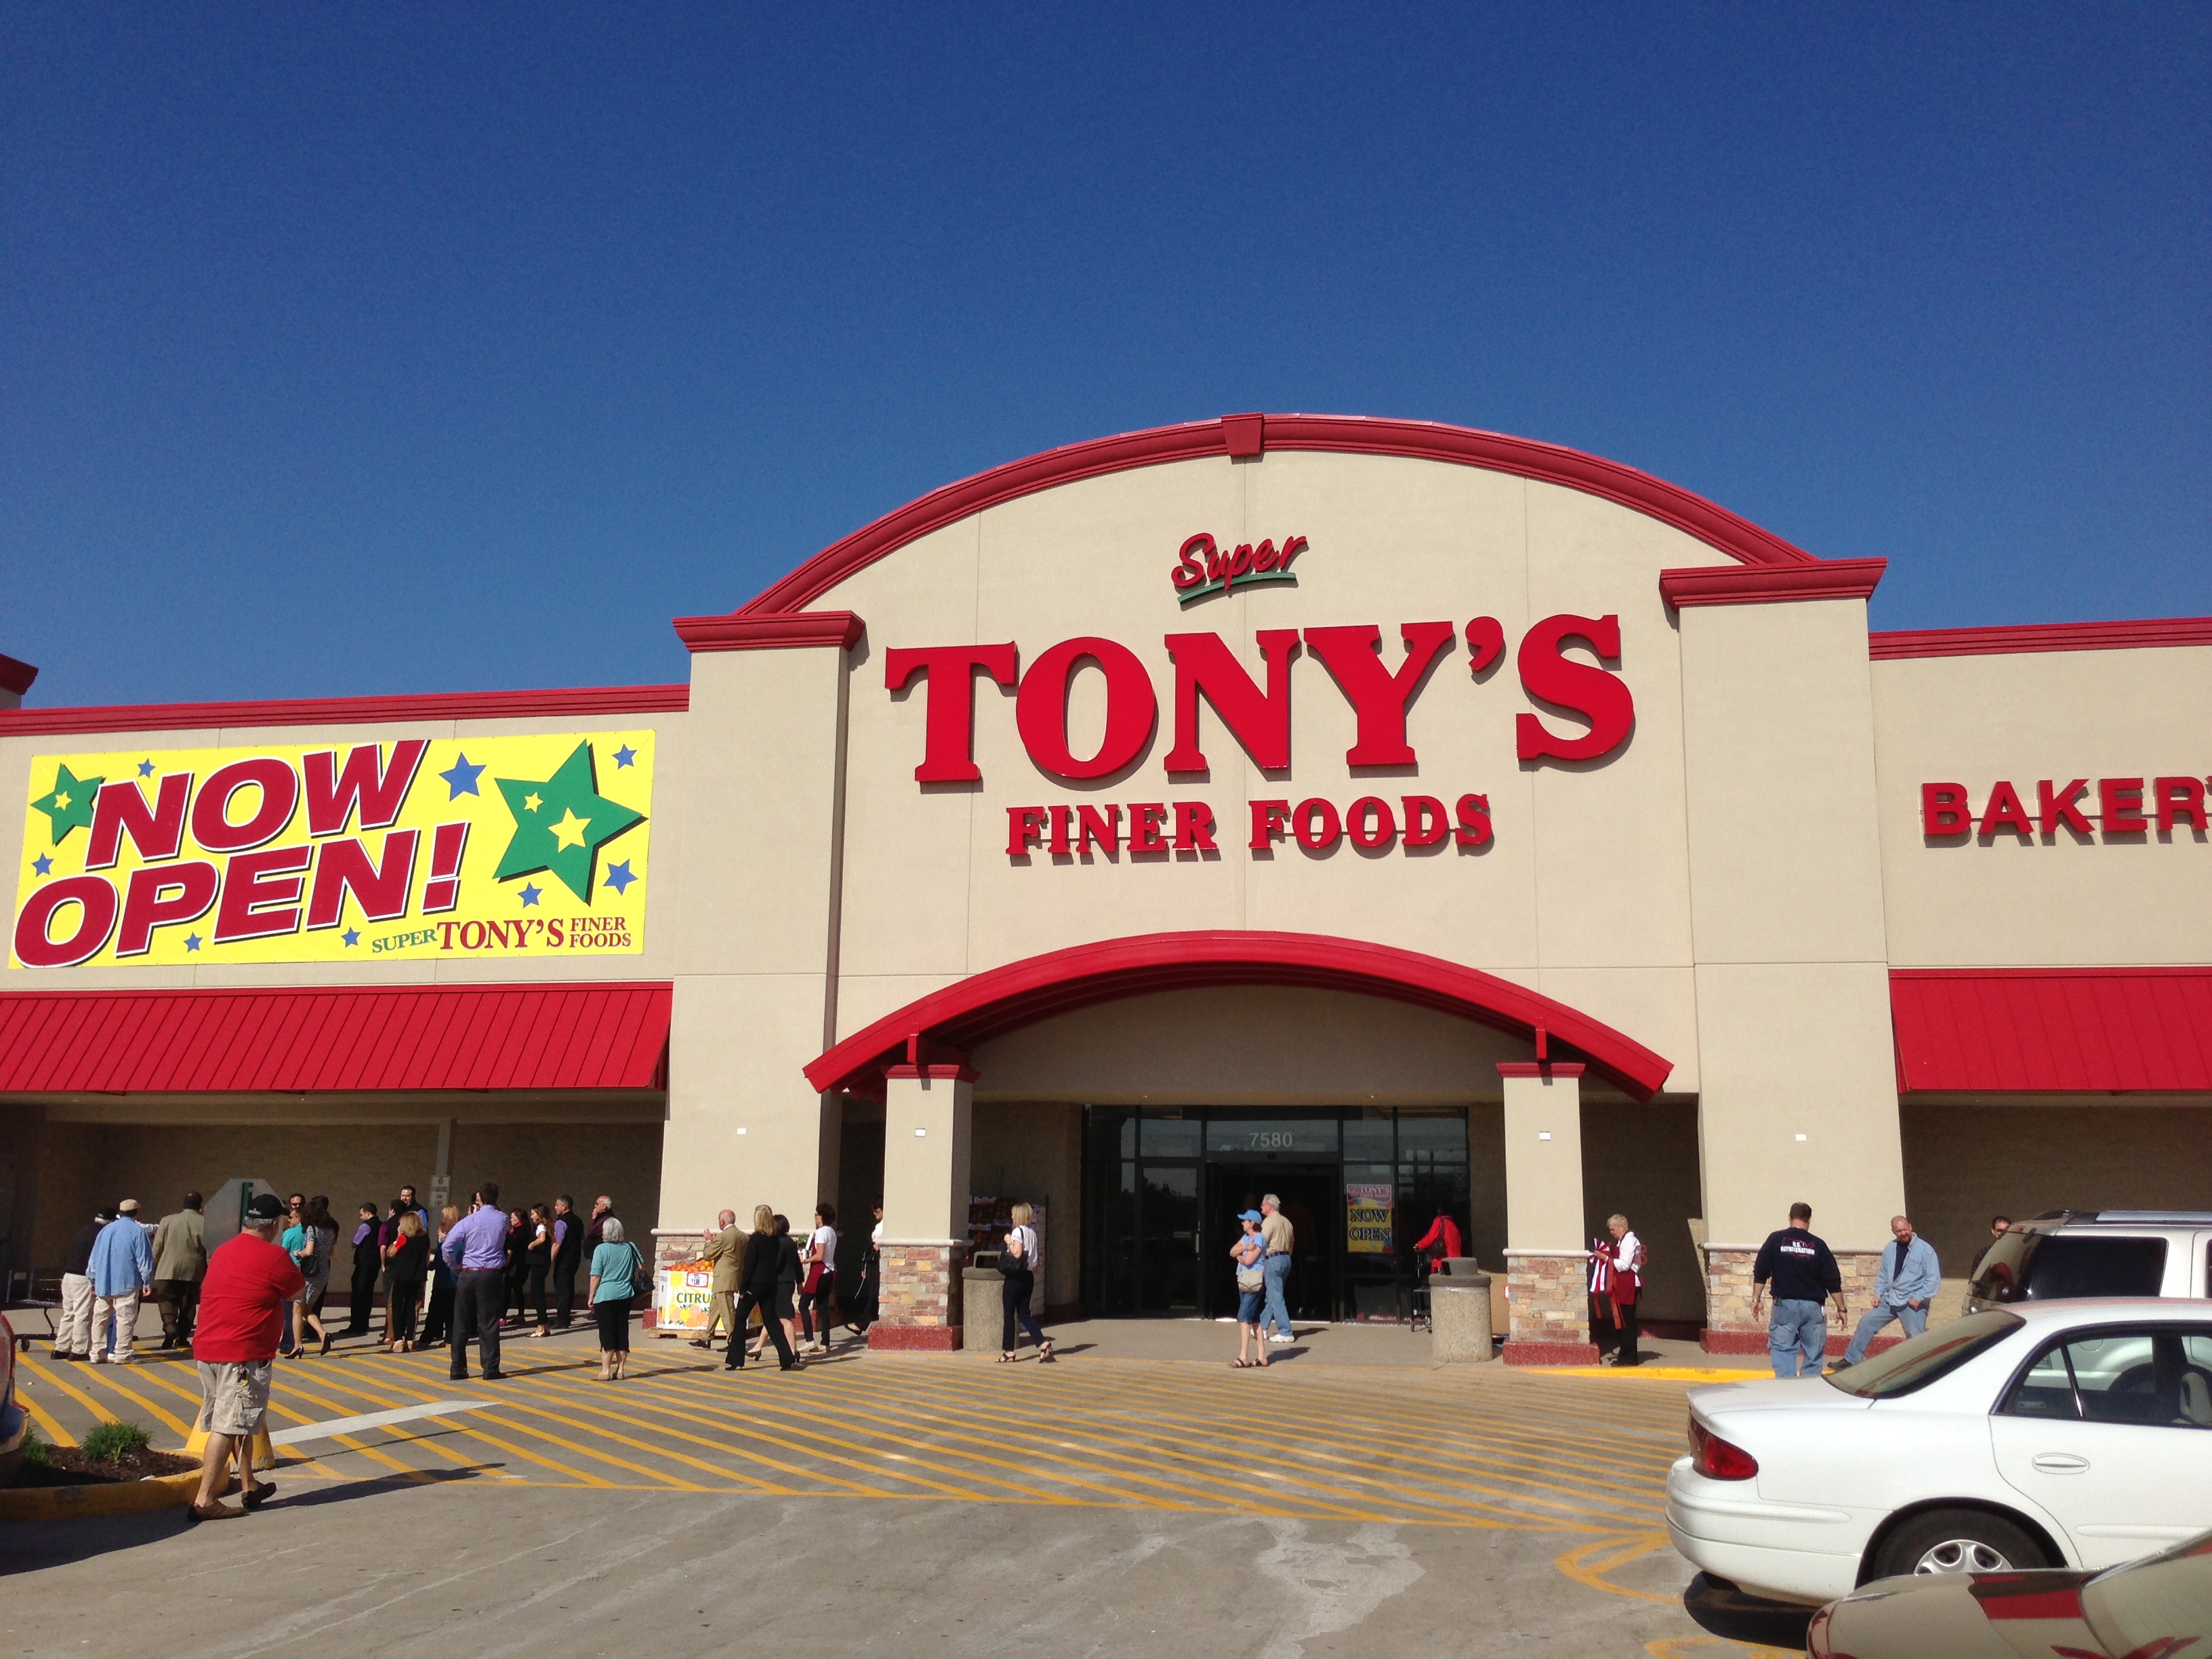 Super Tony's Finer Foods Grocery Store - Niles, IL